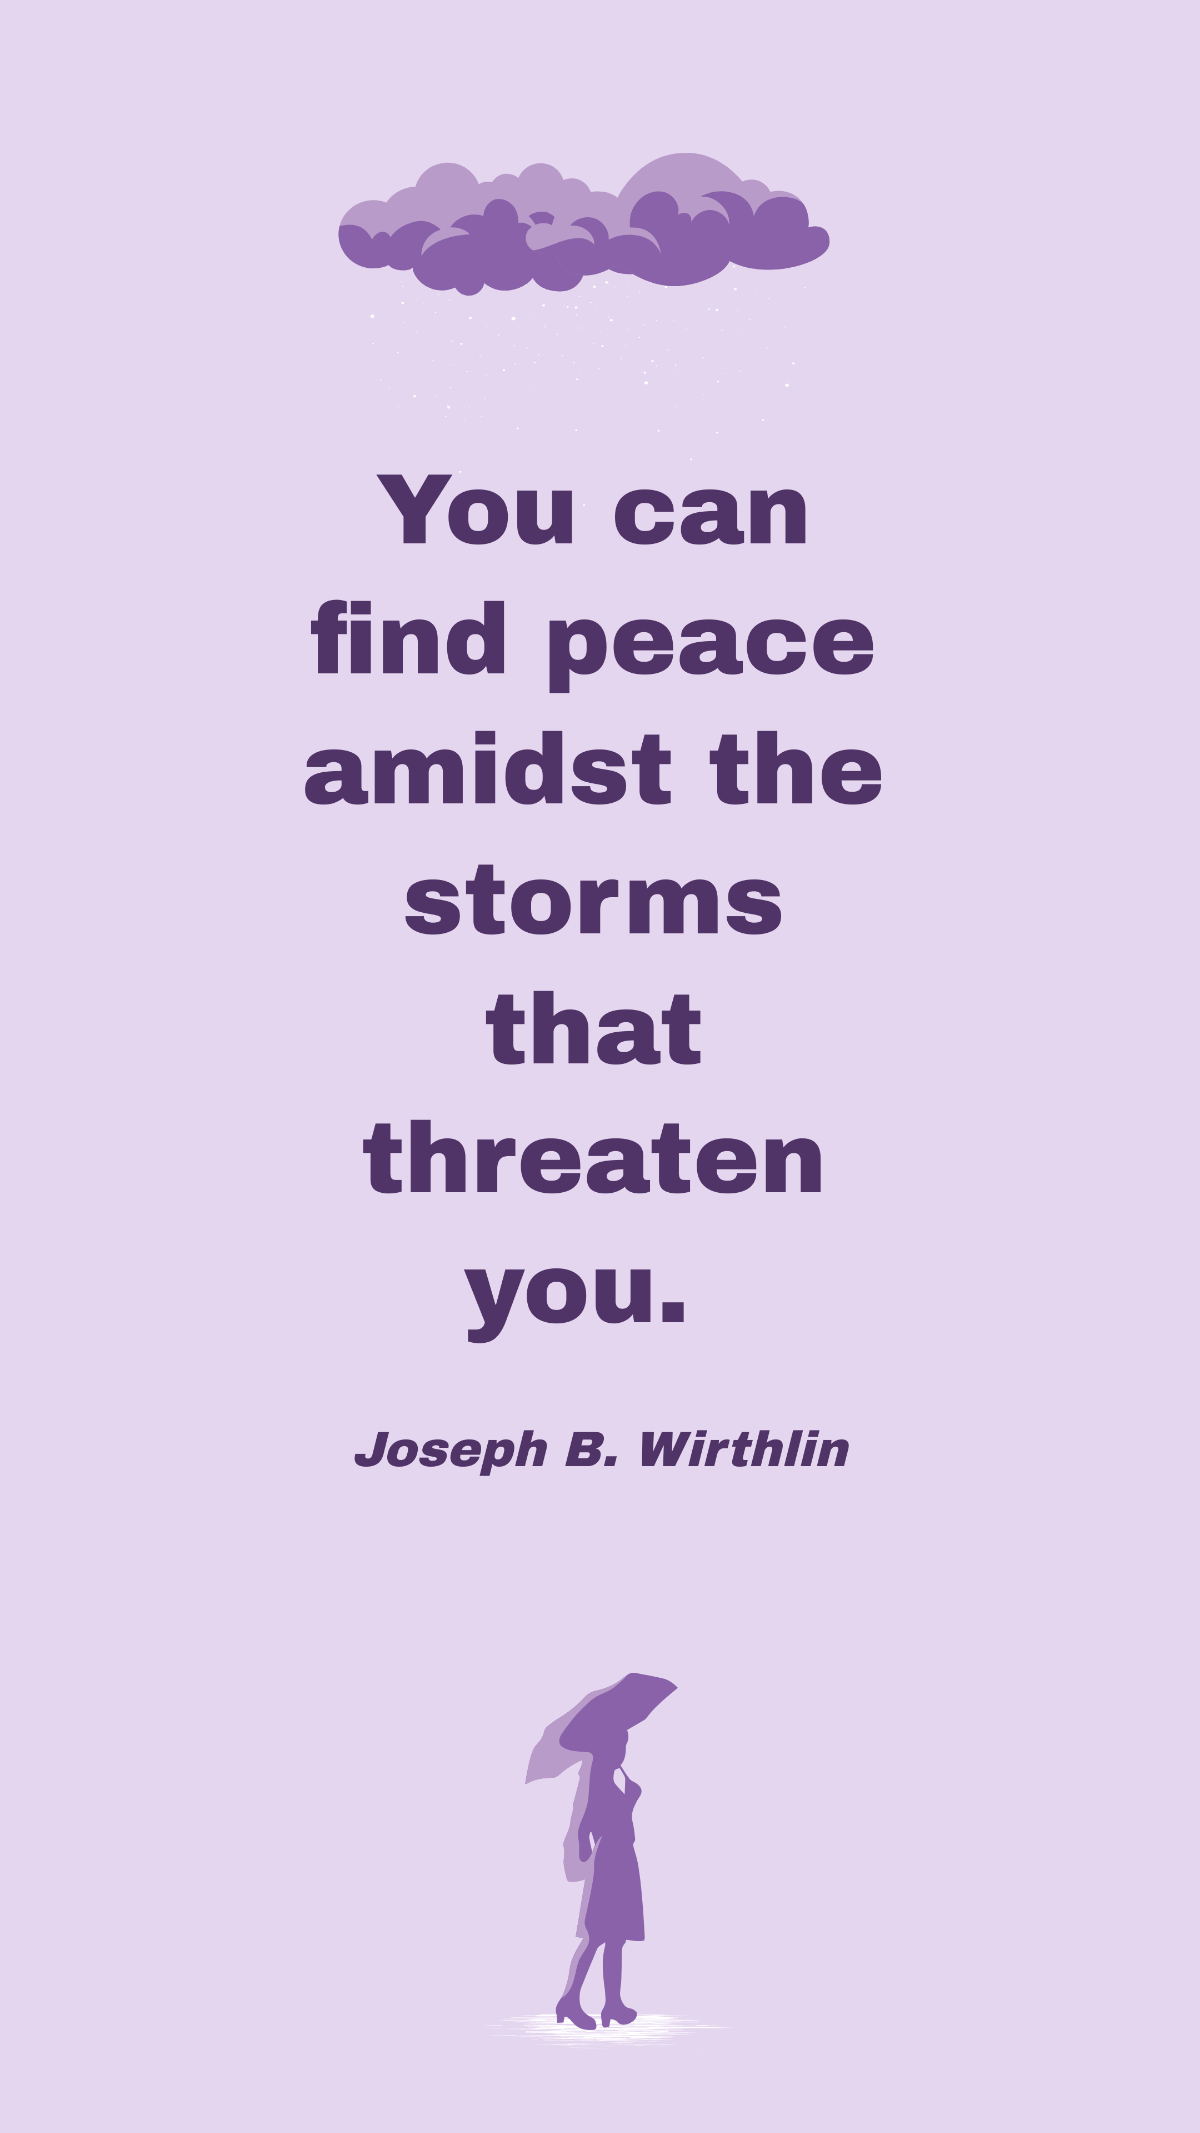 Joseph B. Wirthlin - You can find peace amidst the storms that threaten you. Template